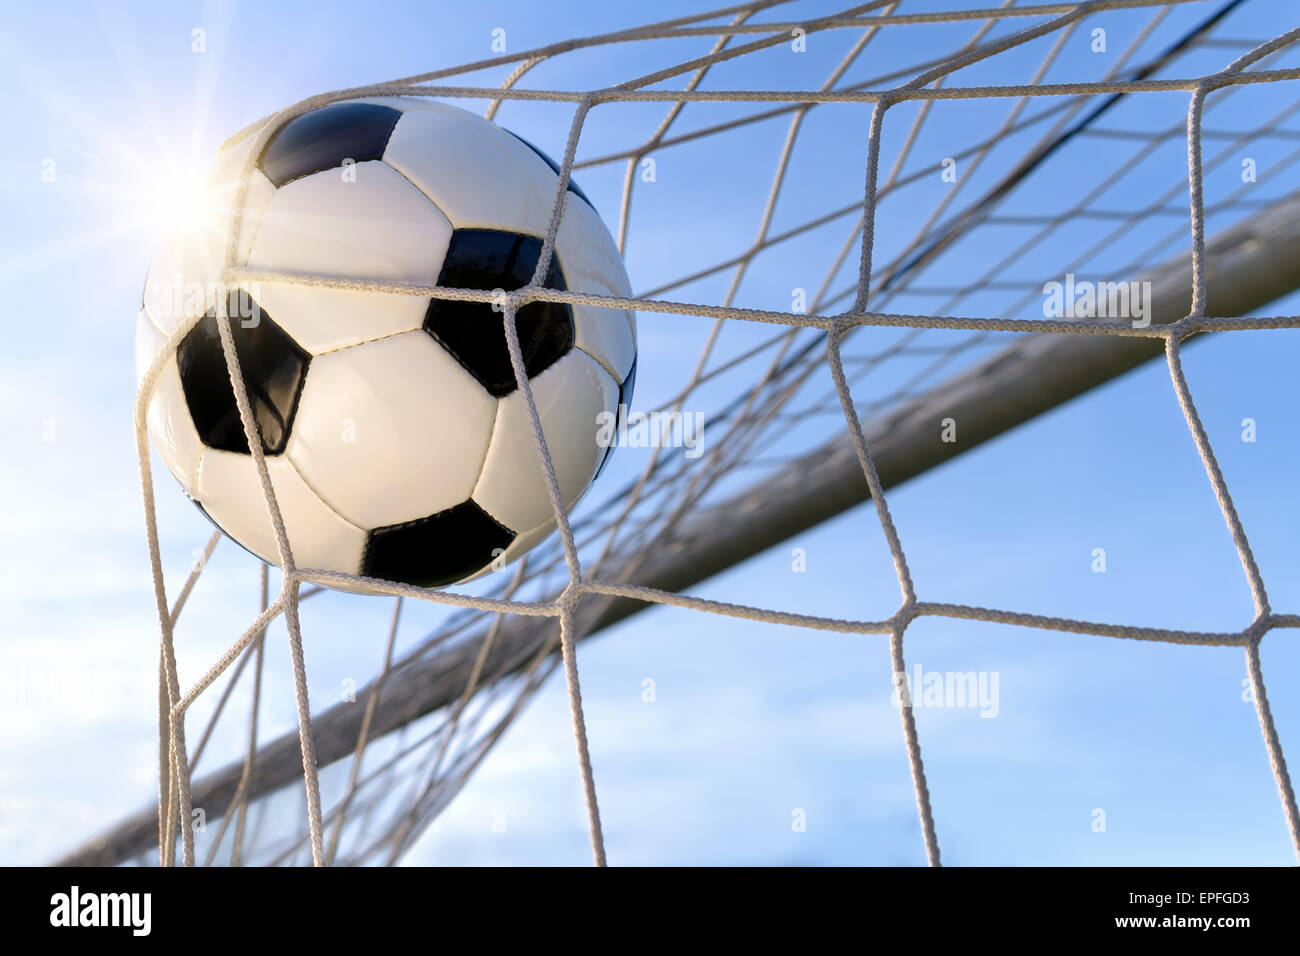 Football or soccer goal, with a neutral design ball flying into the net, blue sky and sun in the background Stock Photo